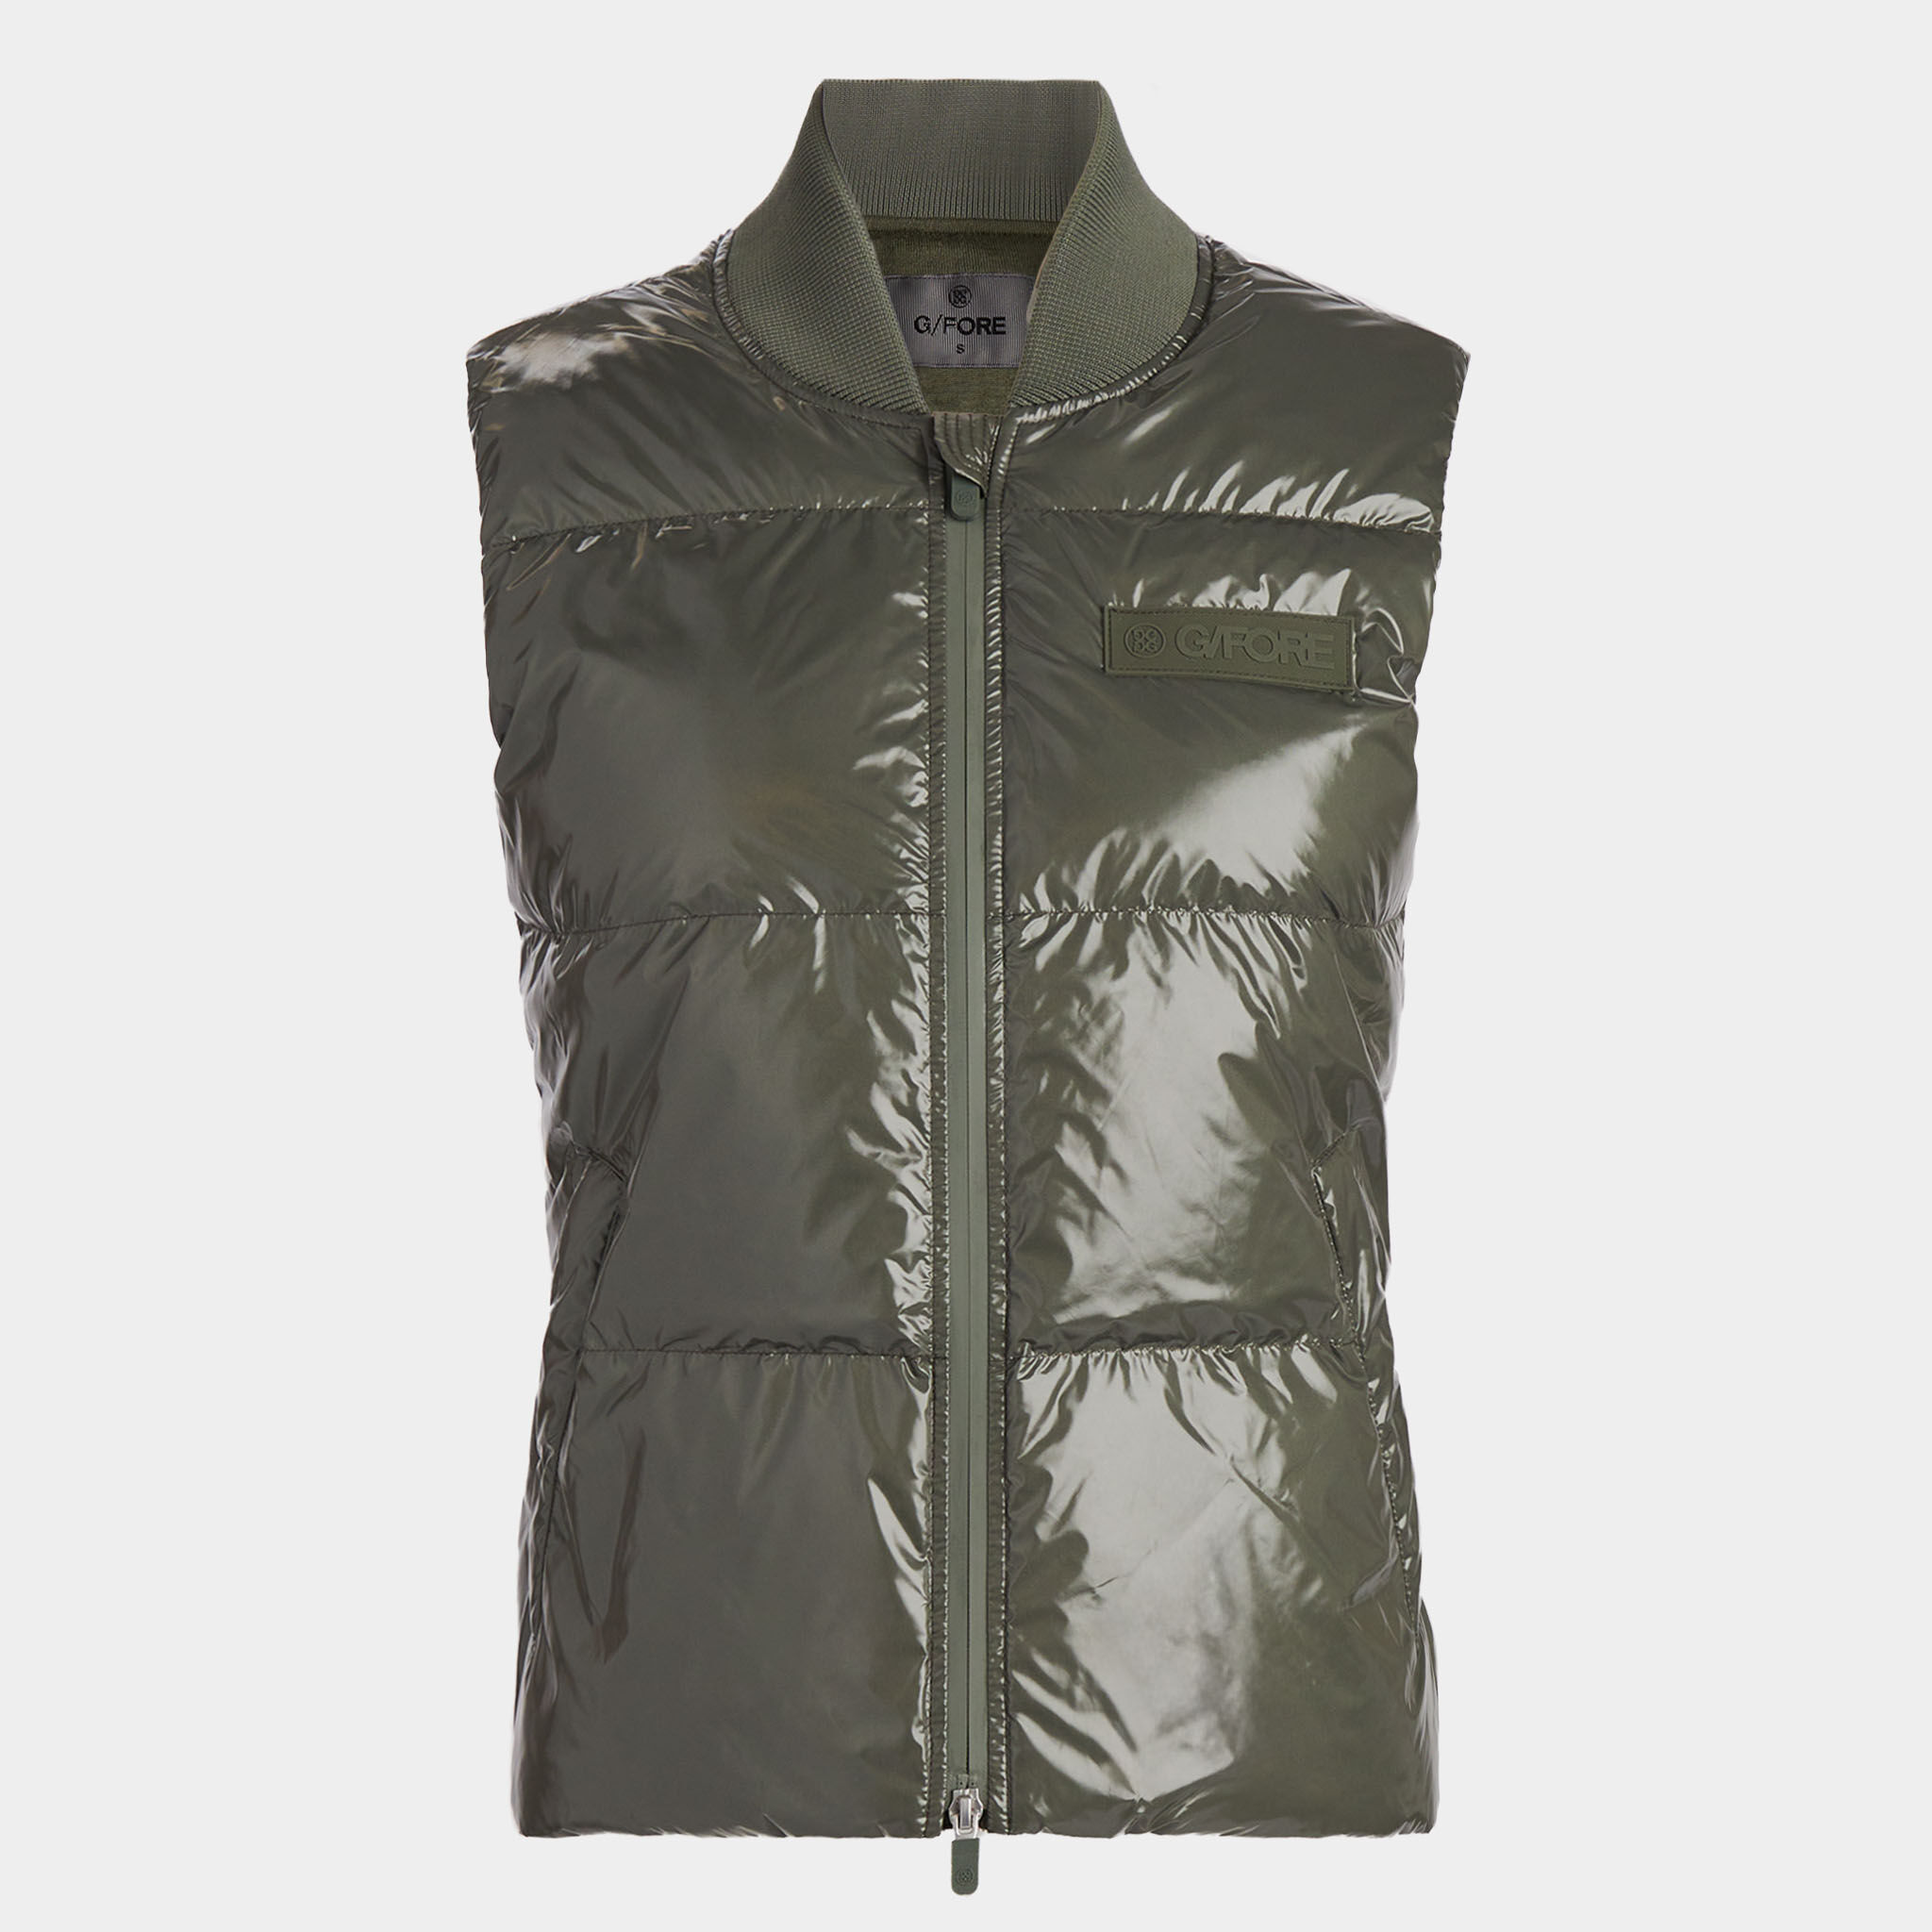 CIRCLE G'S COATED NYLON QUILTED PUFFER VEST | WOMEN'S JACKETS u0026 VESTS |  G/FORE